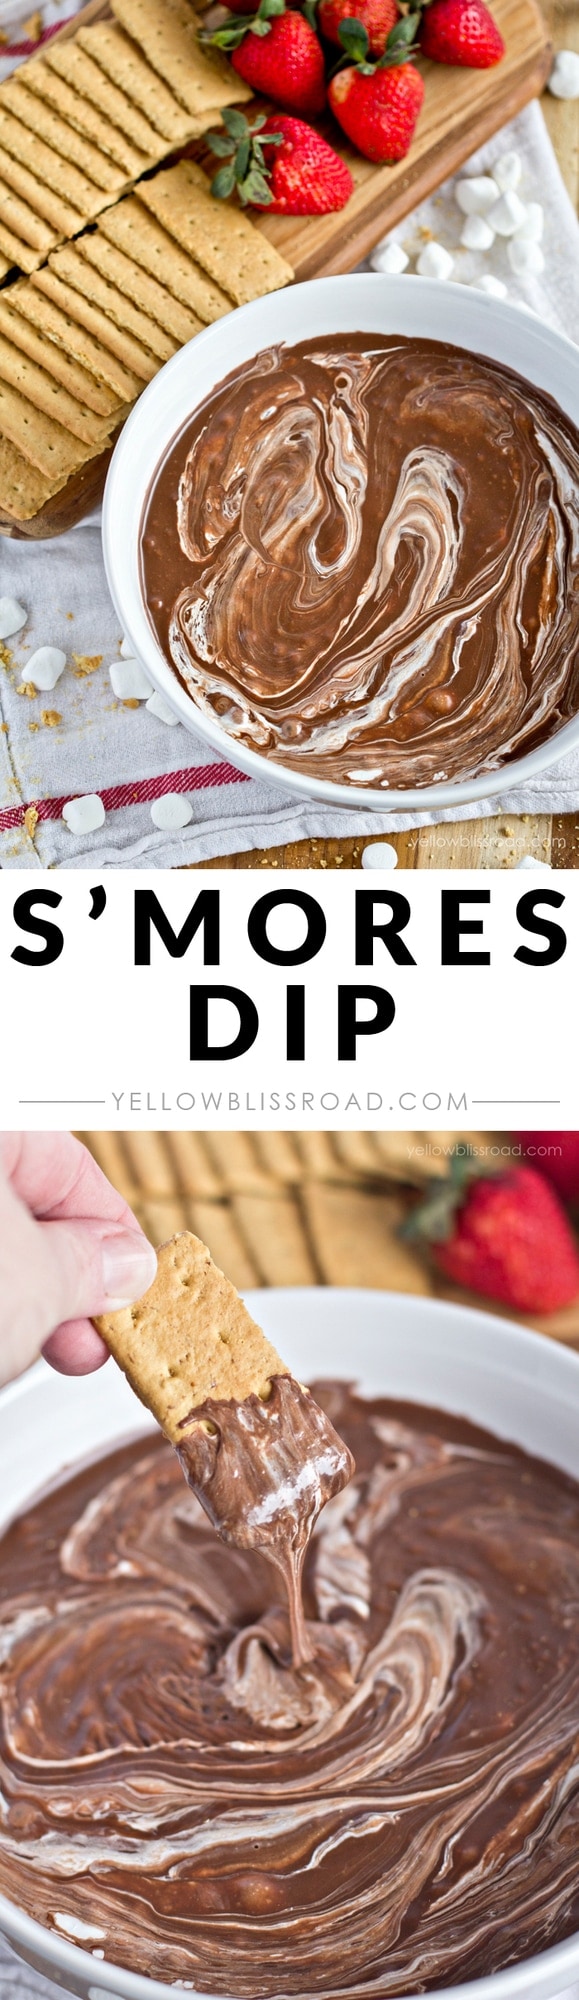 S'Mores Dip - A perfect summer treat for dipping graham crackers, fruit or pretzels!